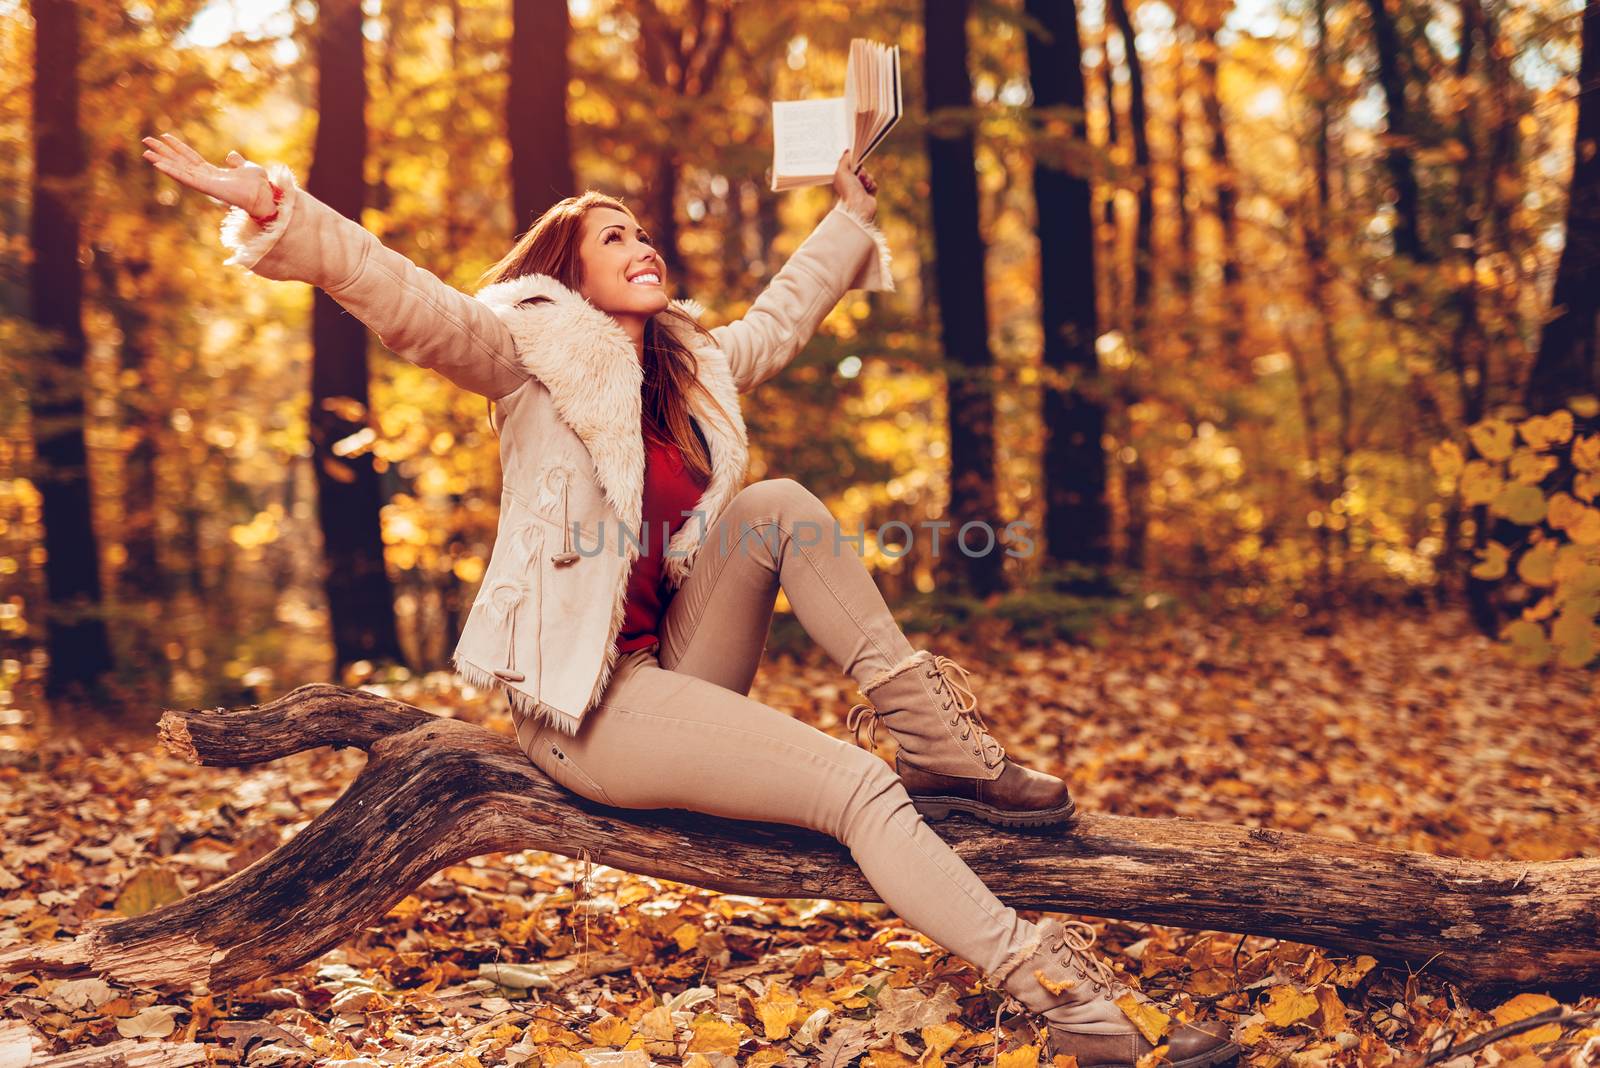 Beautiful young smiling woman holding book and having fun in sunny forest in autumn colors.